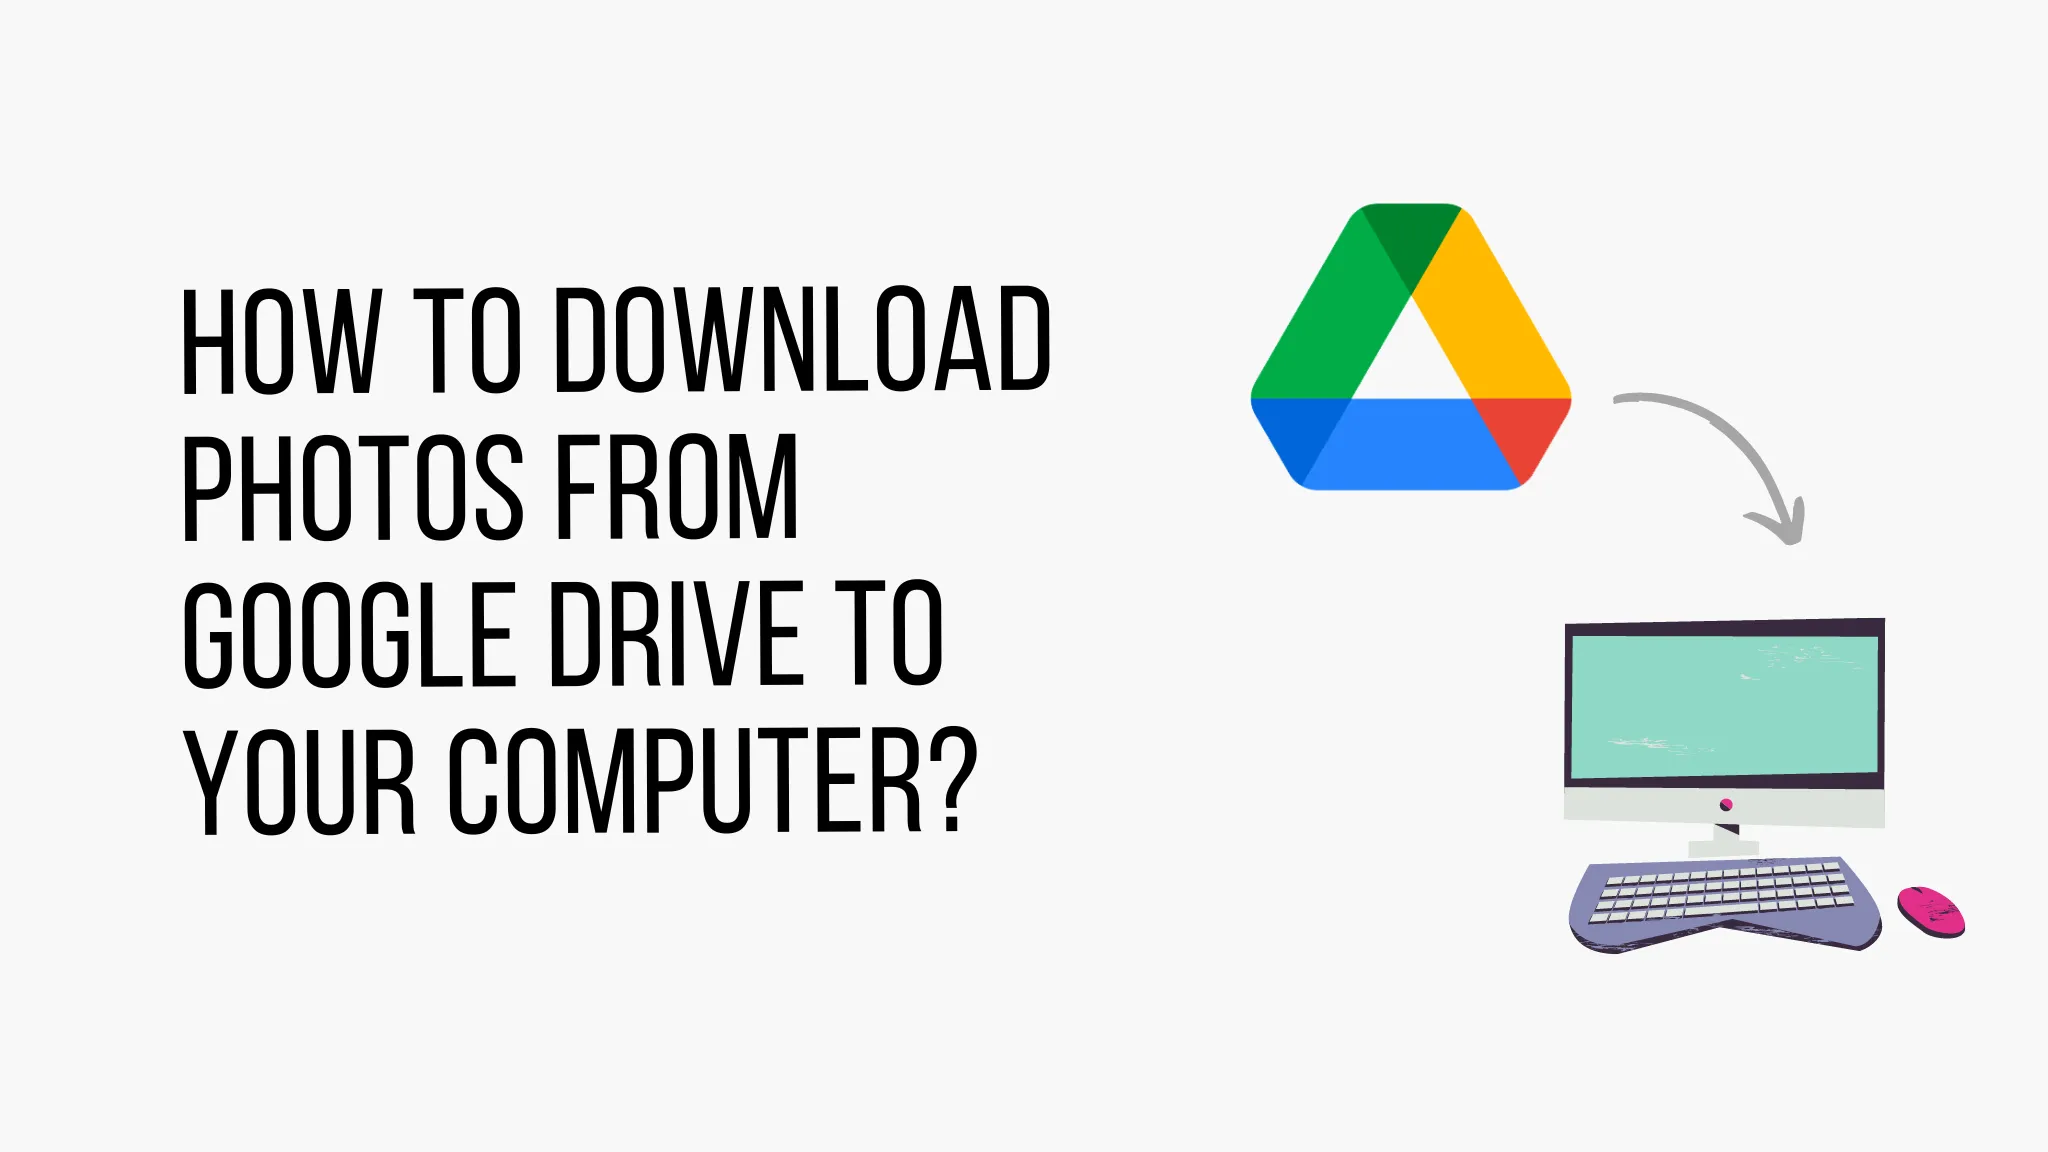 How to download photos from Google Drive to your computer?